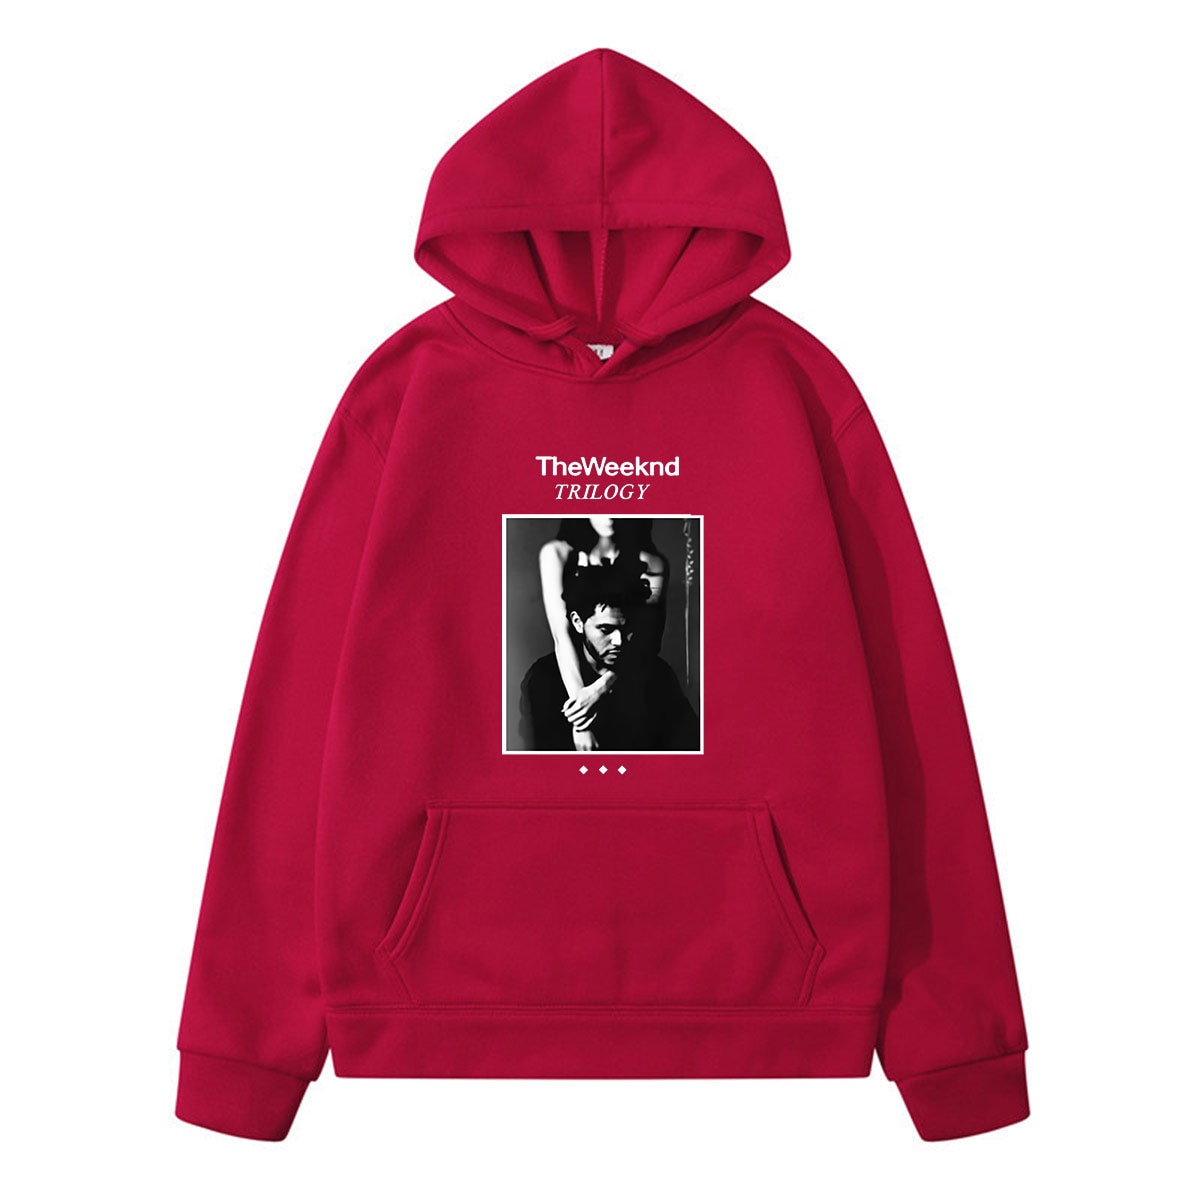 The Weeknd Trilogy Hoodie. The Weeknd Merch sold by Shrink